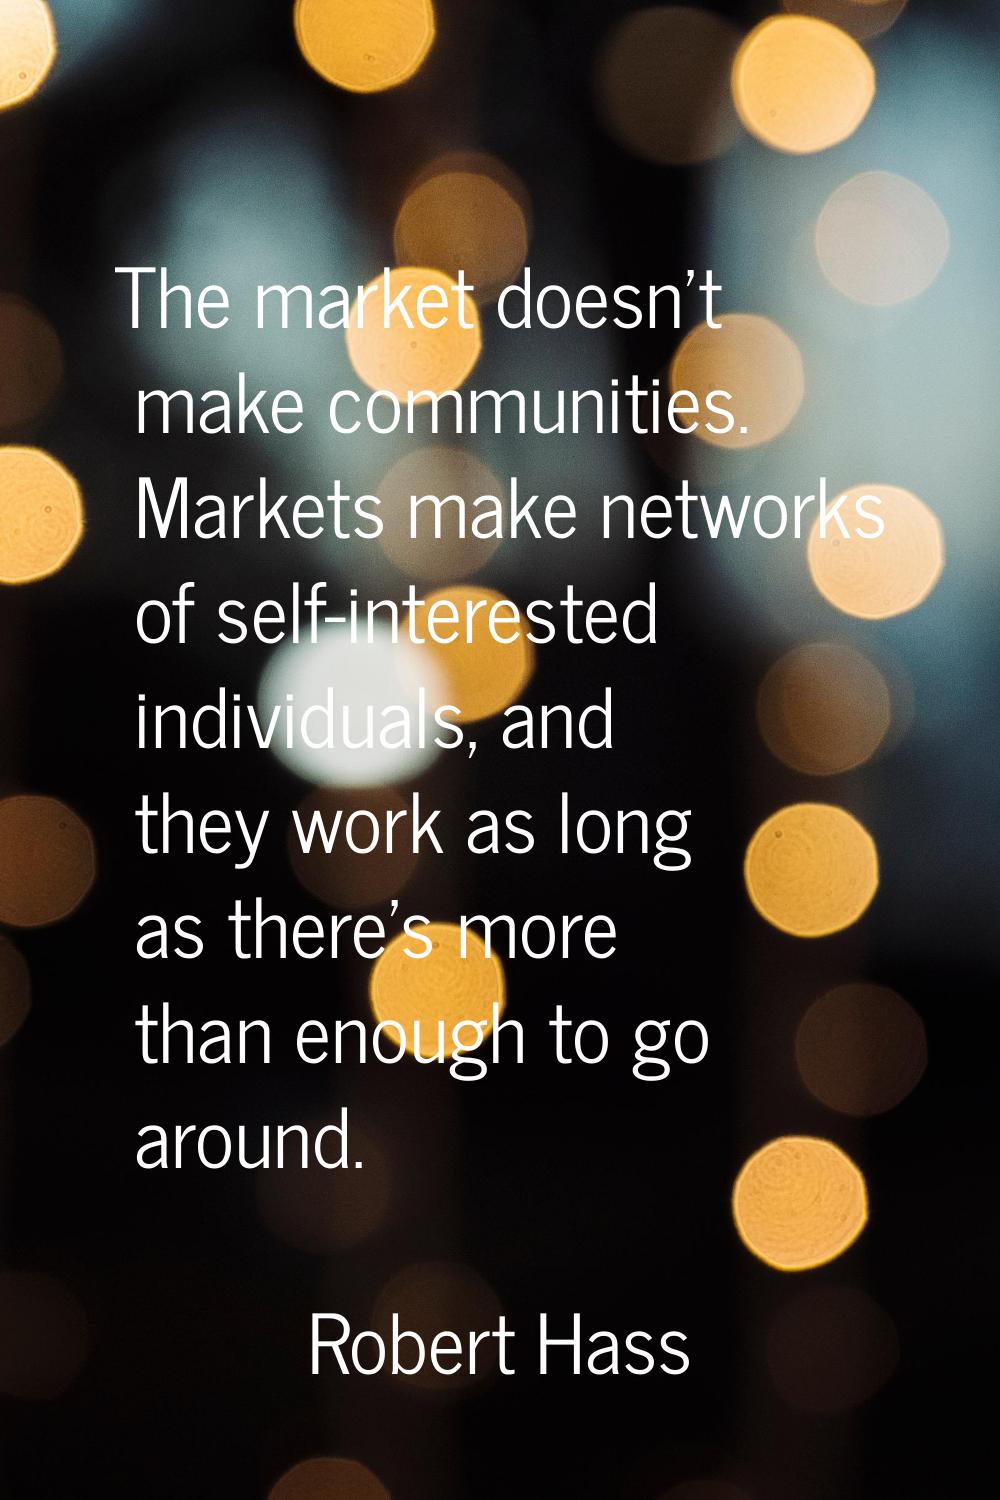 The market doesn't make communities. Markets make networks of self-interested individuals, and they